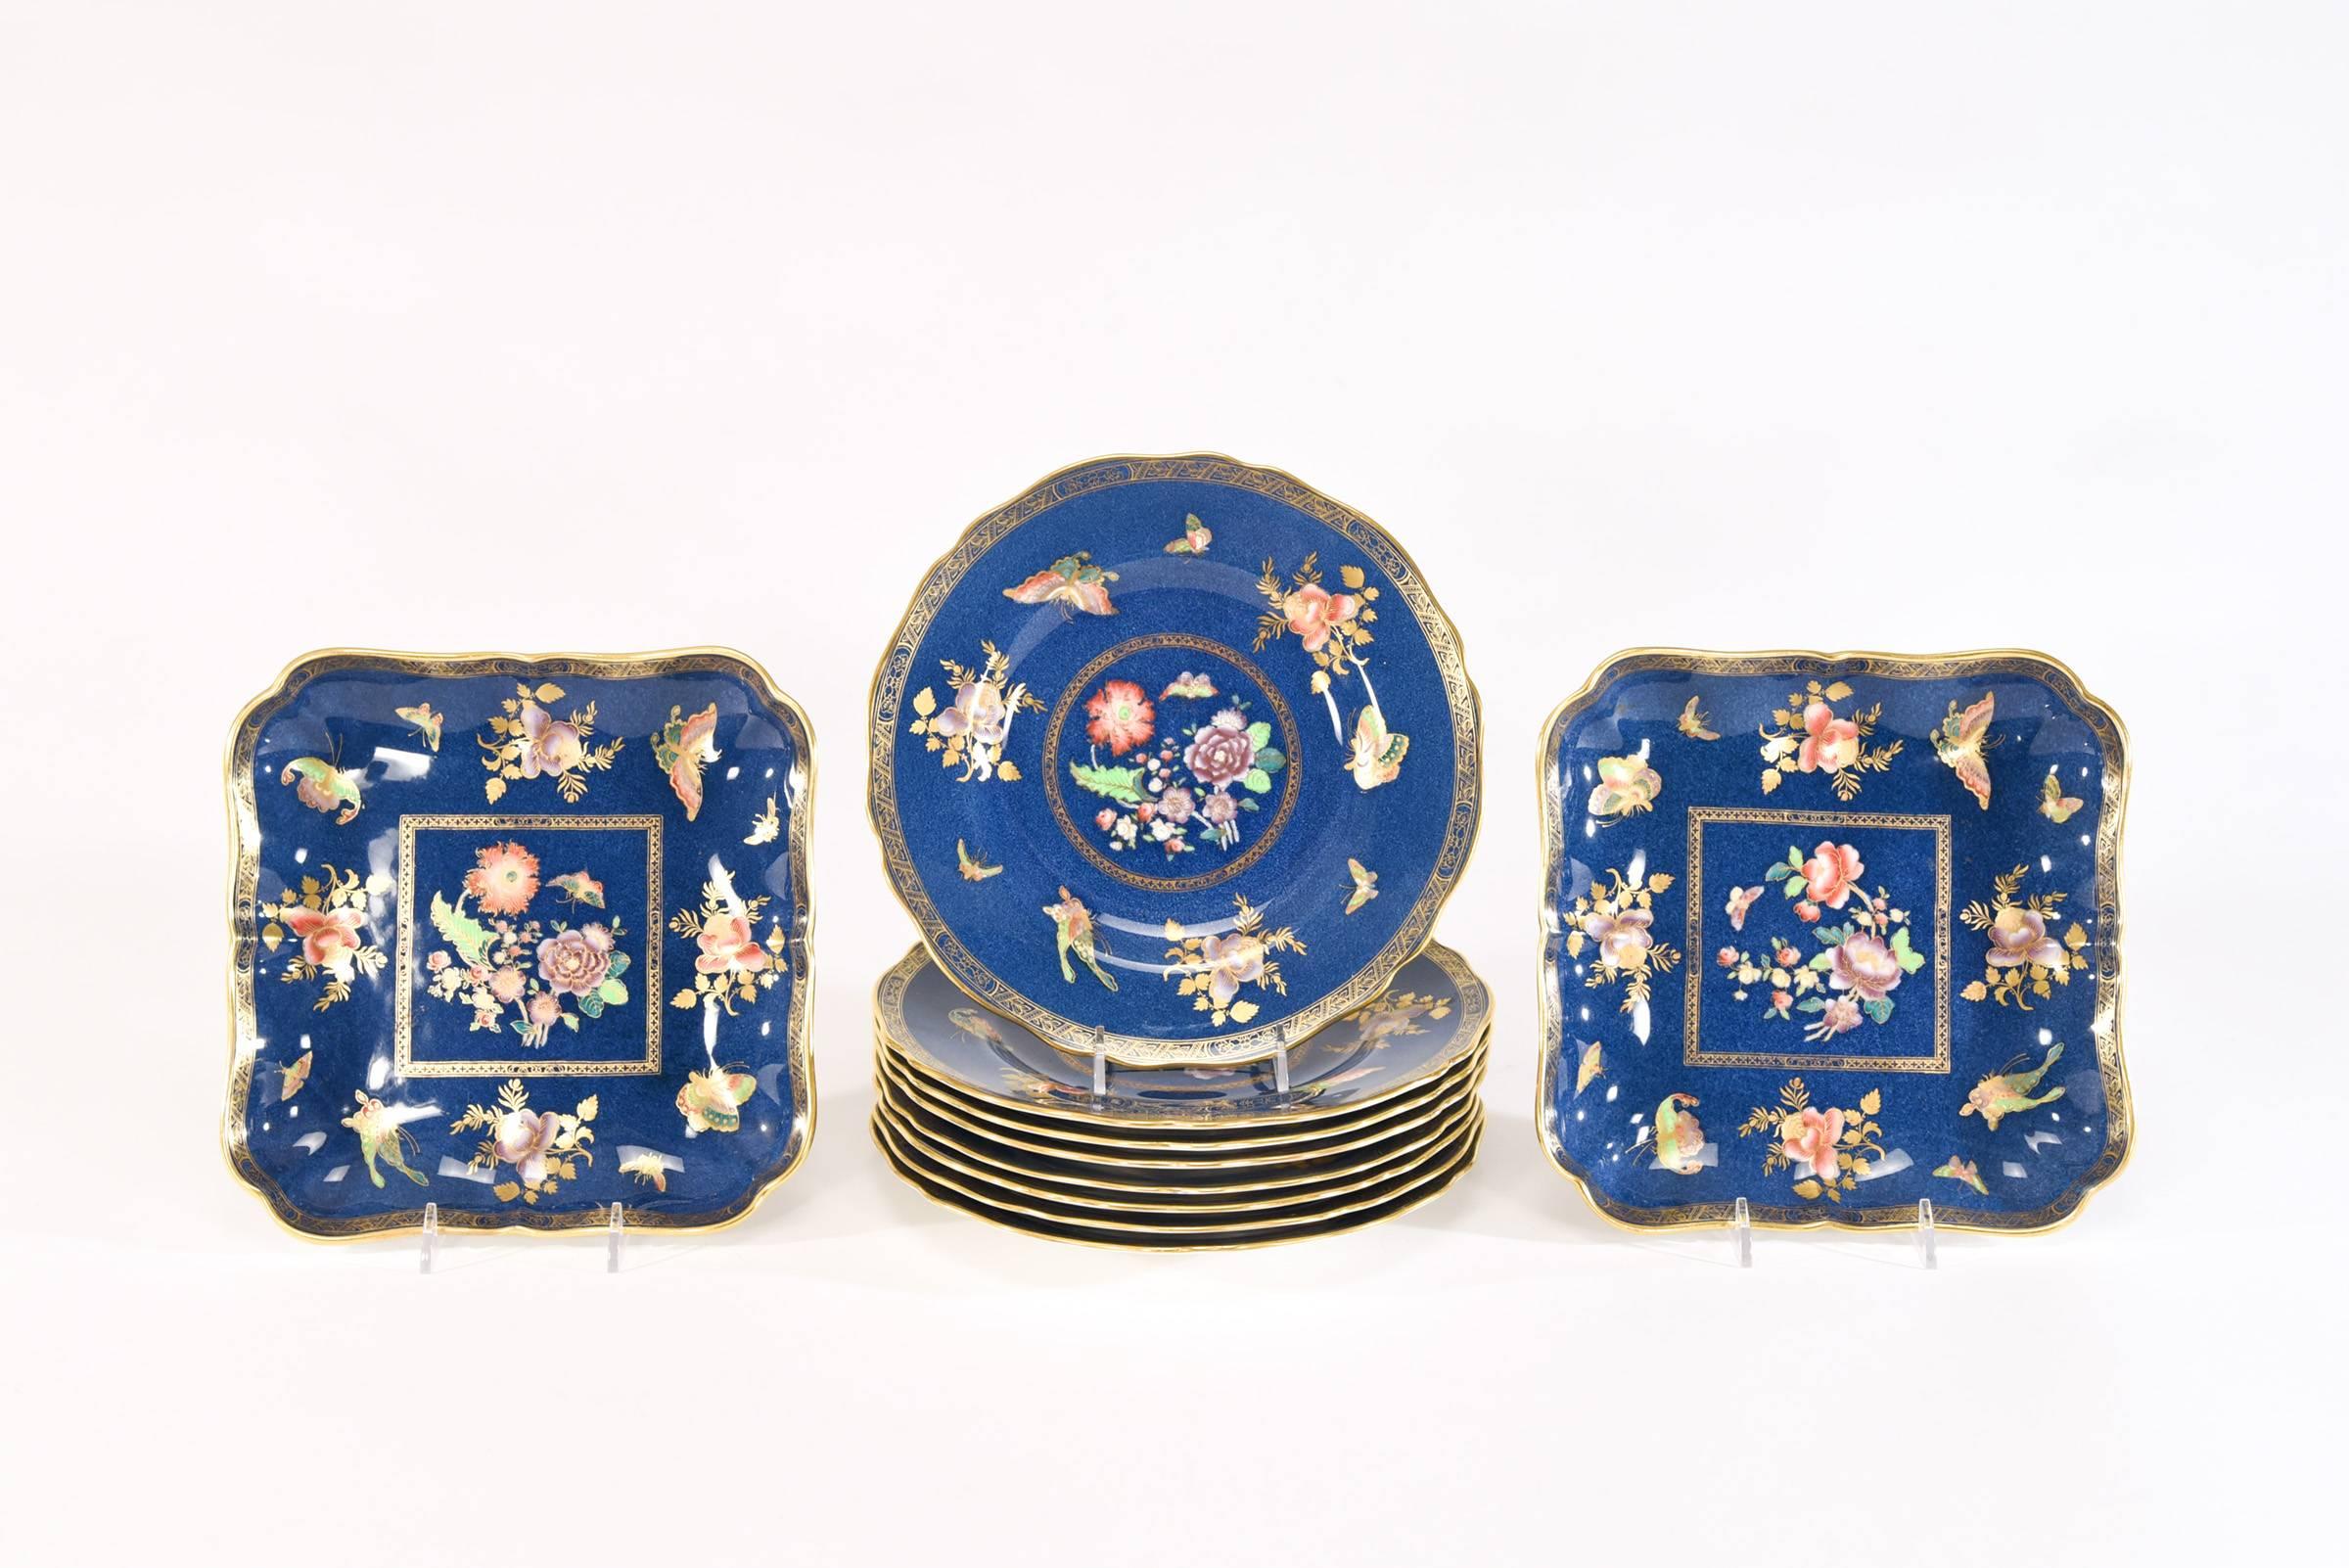 This set of 8 Copeland Spode dessert plates is accompanied by 2 matching square serving plates- Perfect for a cheese and fruit course as well as desserts- The Aesthetic Movement motif features flowers and butterflies, highlighted in gold on a powder